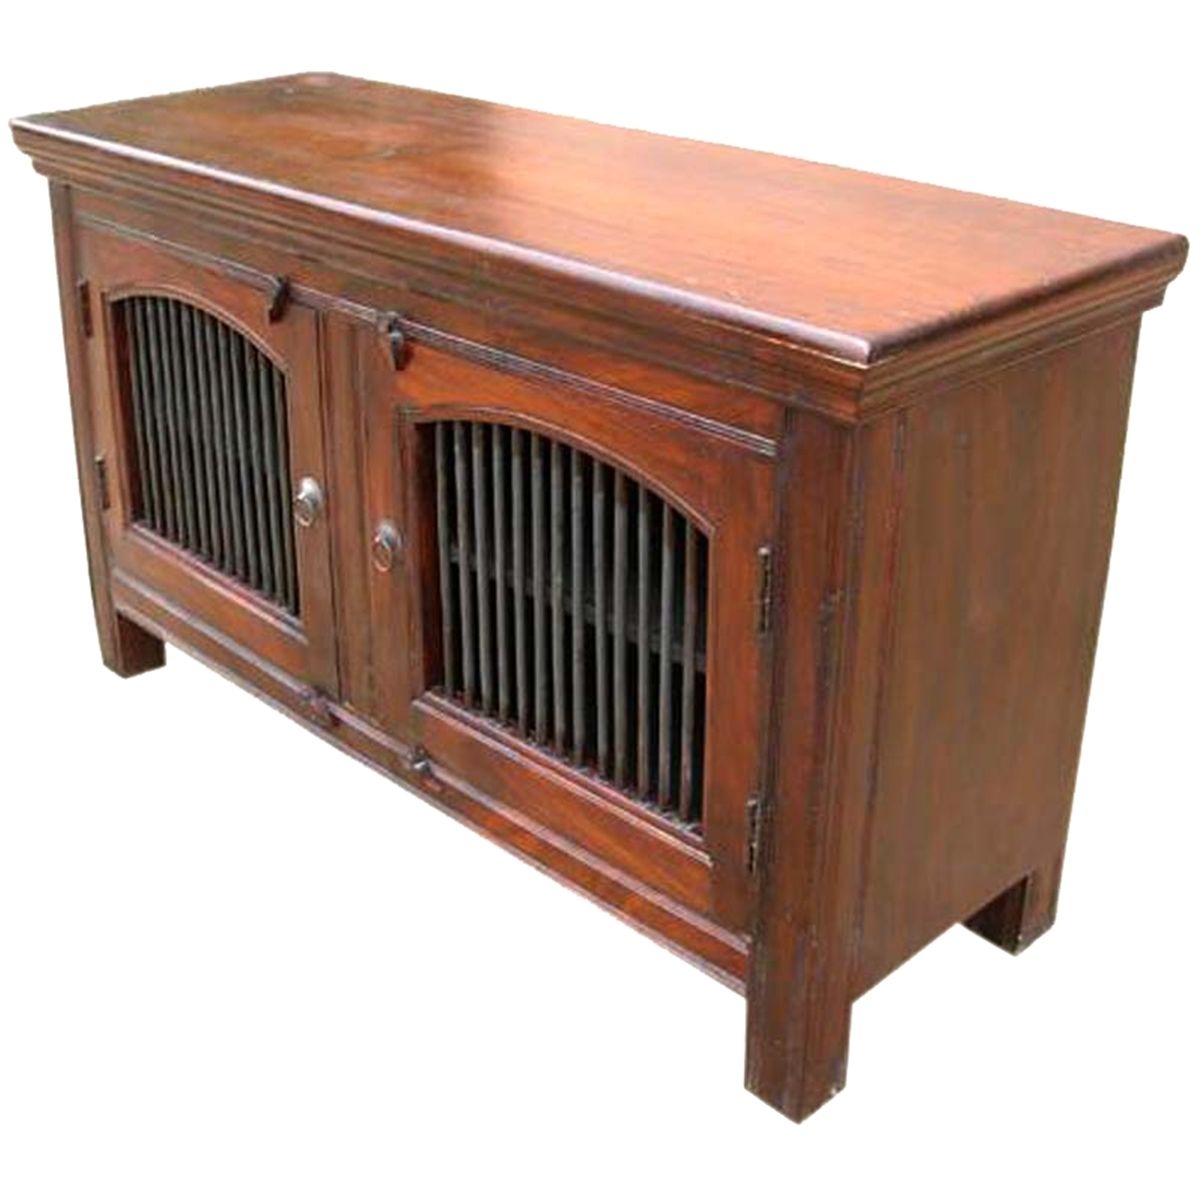 Wade Solid Wood 2 Wrought Iron Door Buffet Cabinet With Most Popular Black Oak Wood And Wrought Iron Sideboards (View 14 of 20)